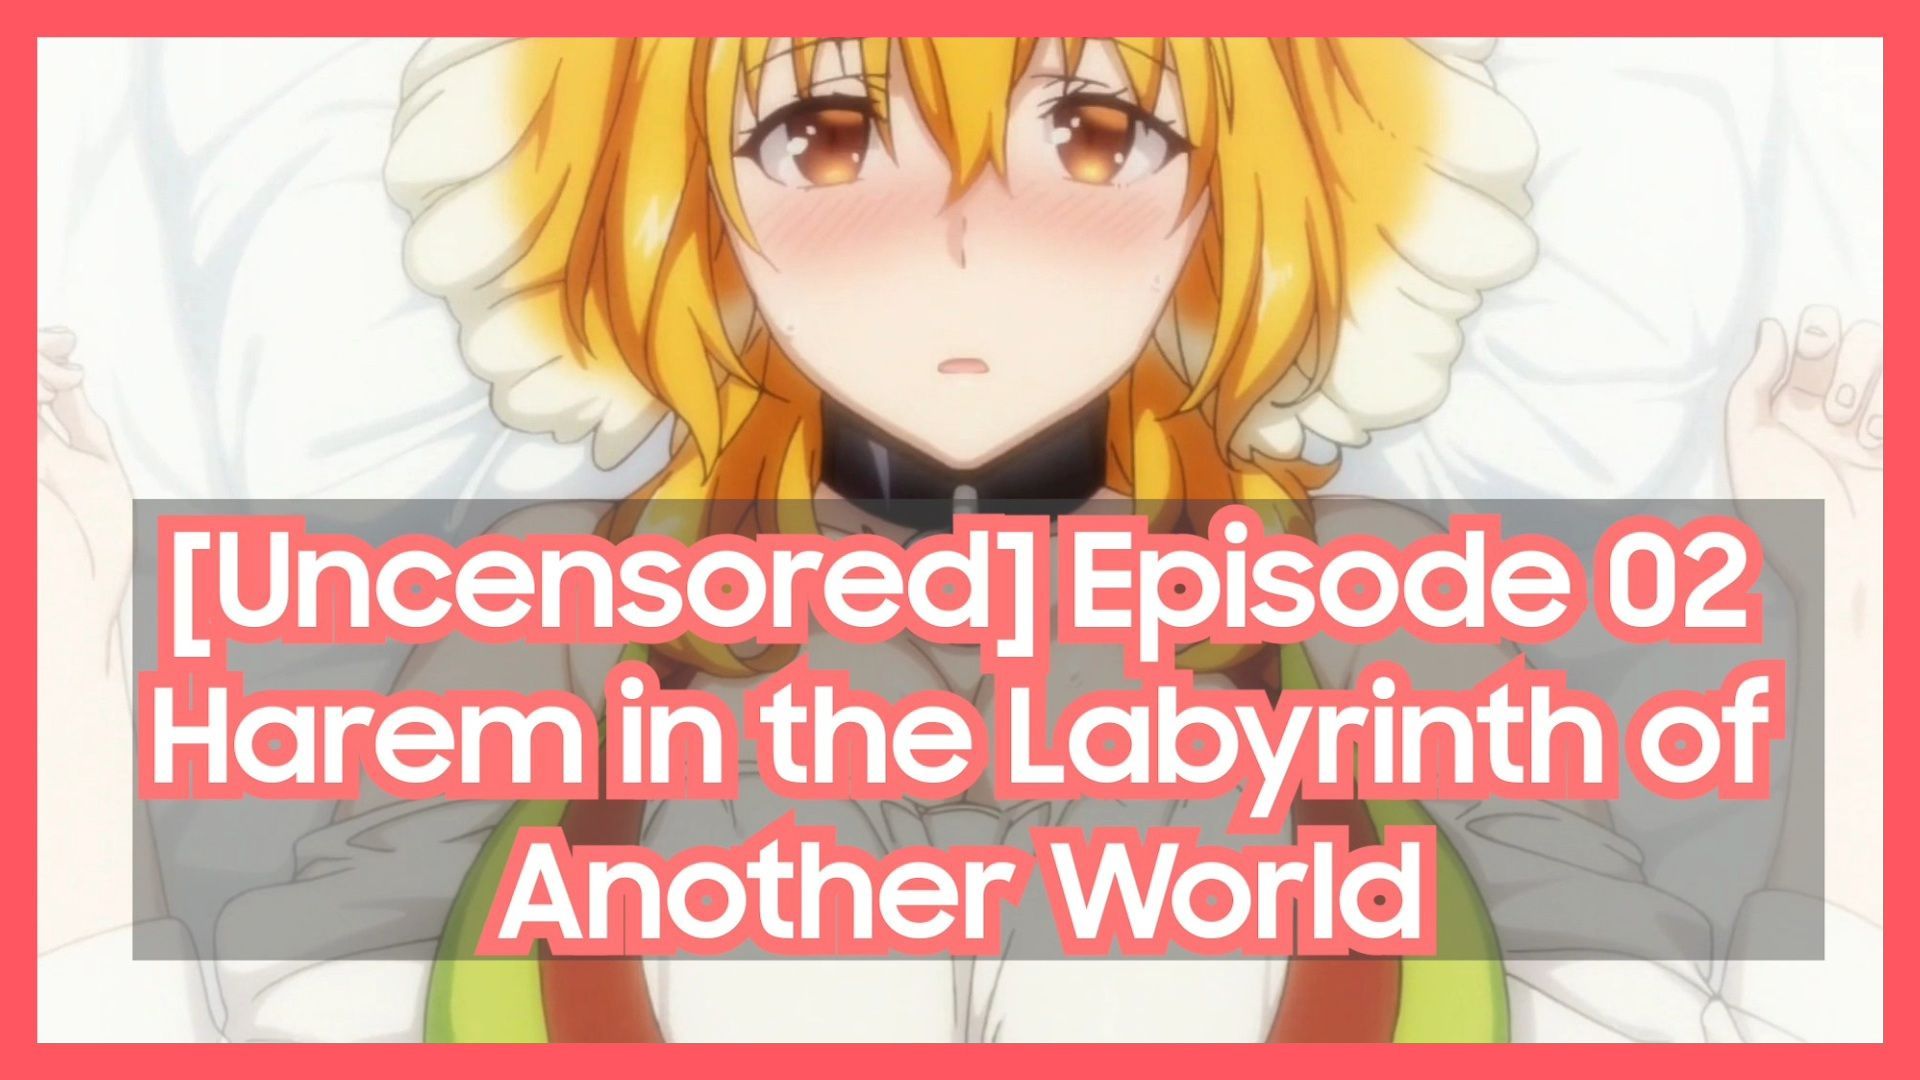 Harem in the labyrinth of another world episode 2 uncensored